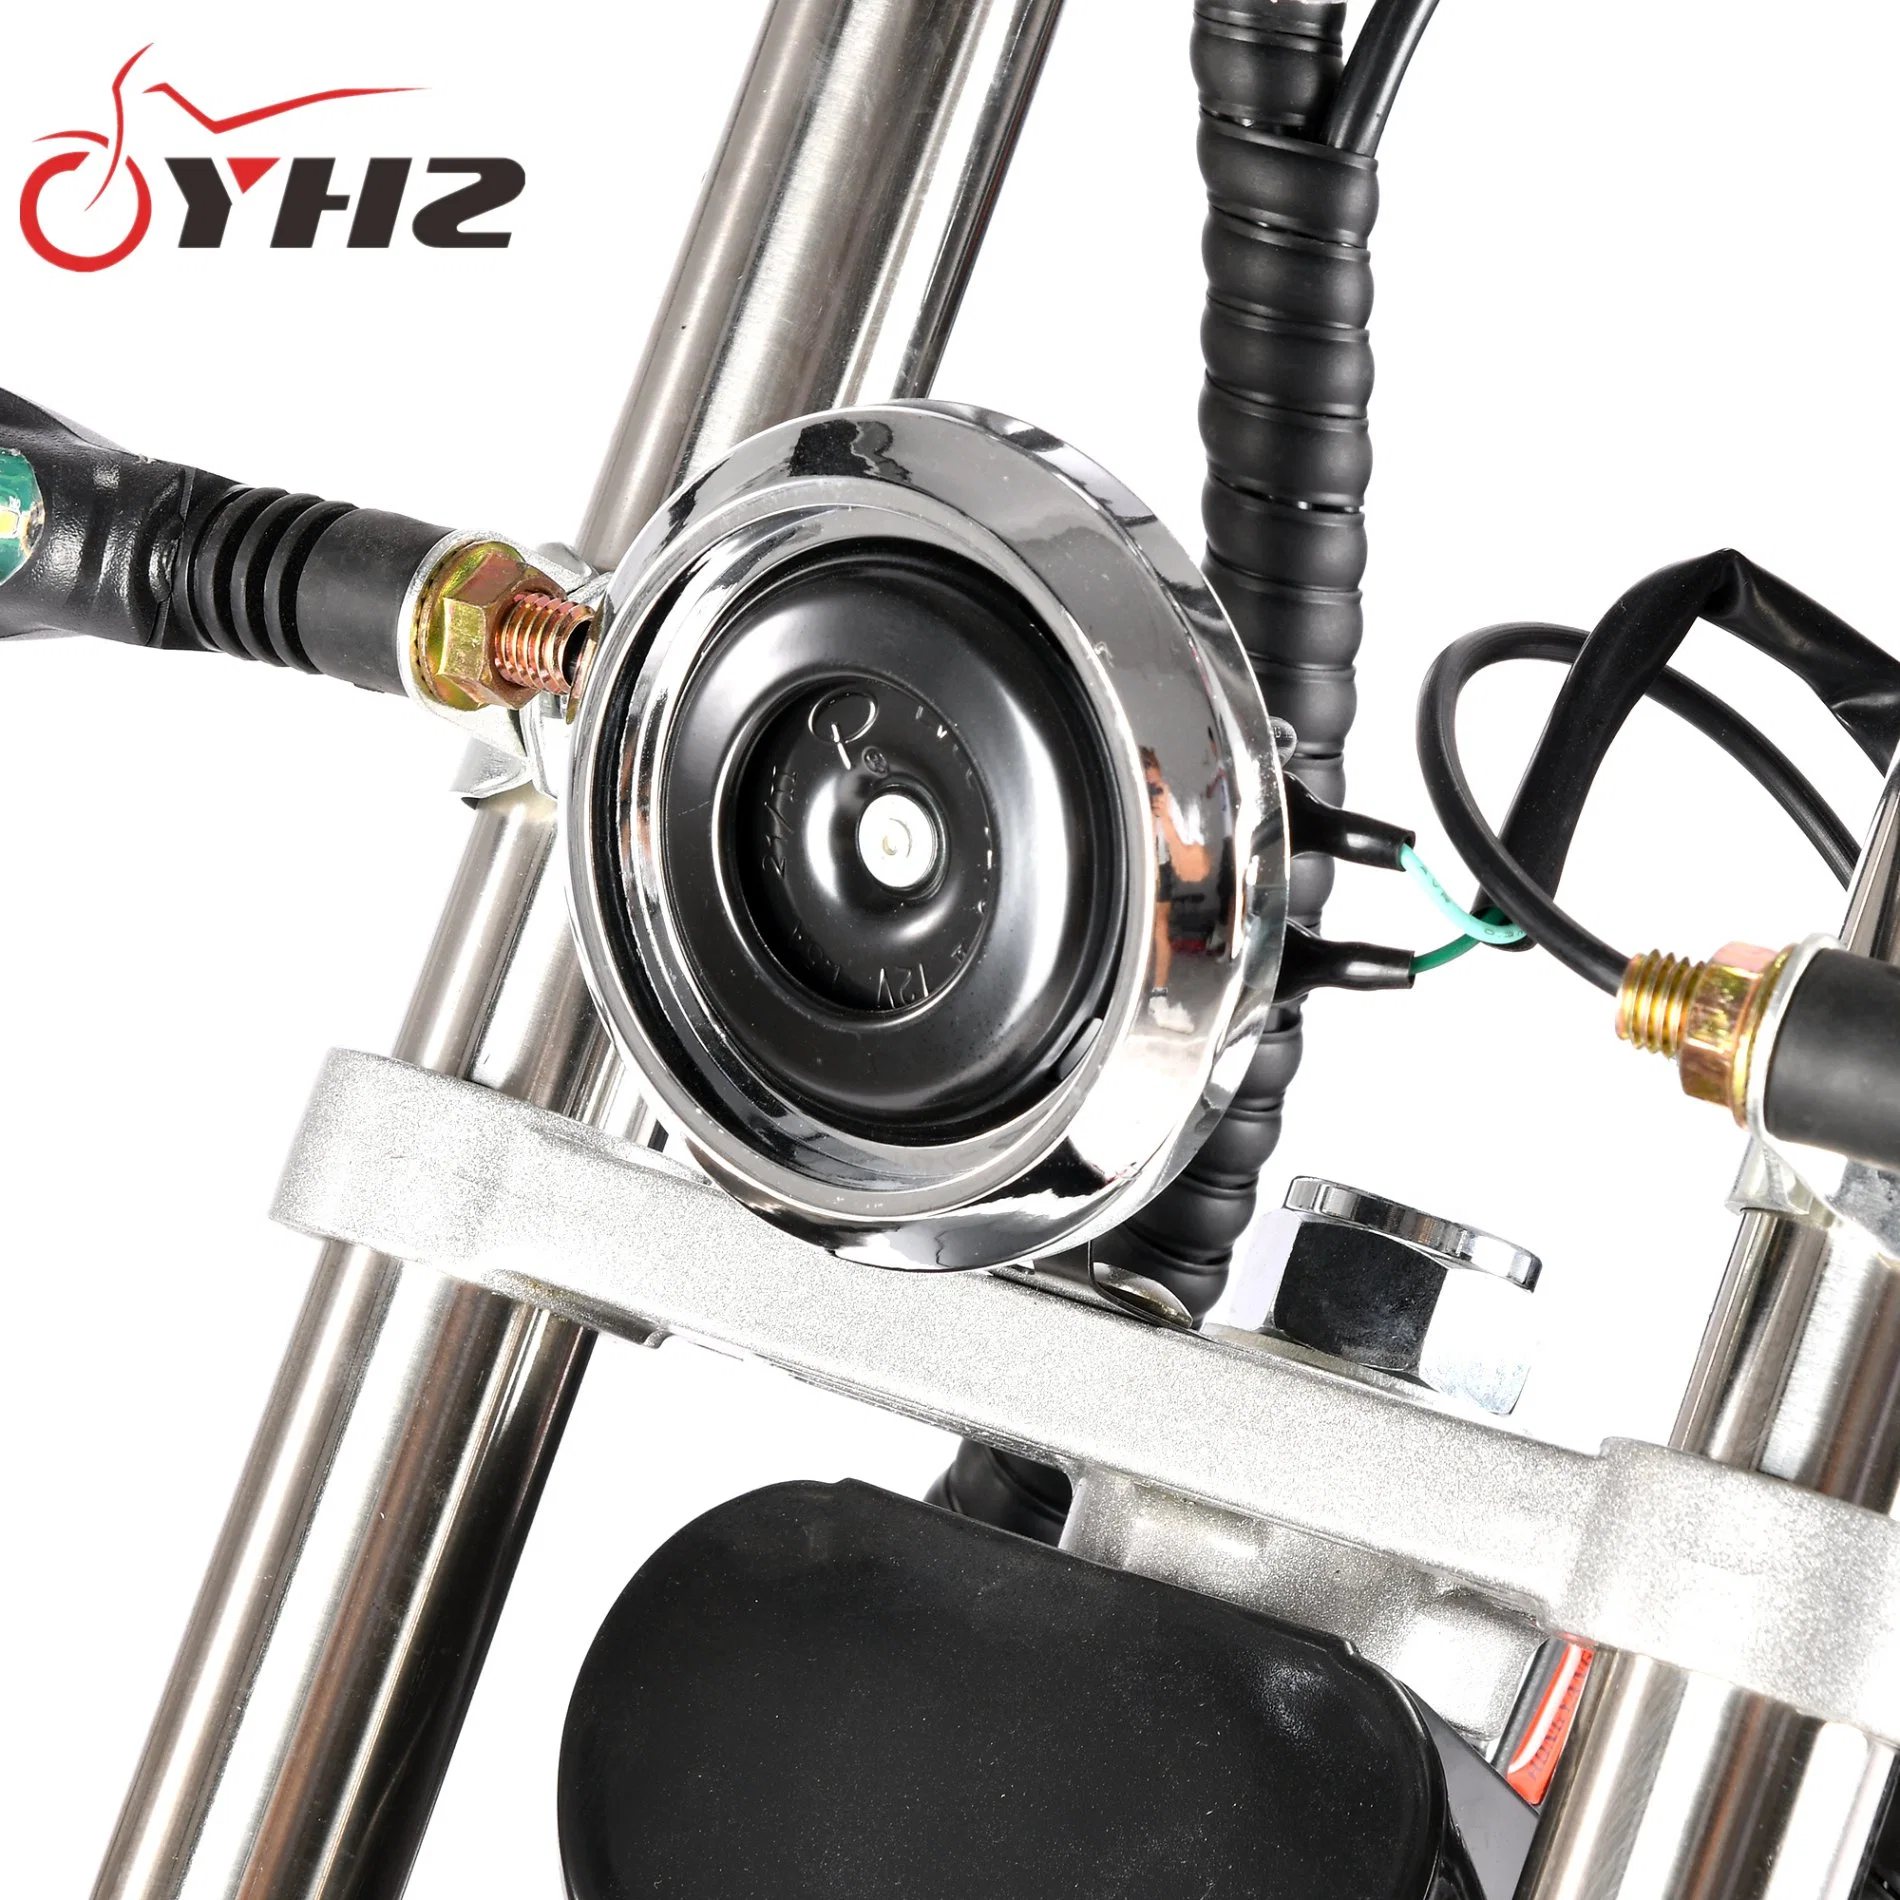 Cp-7 Only The Horn Parts of Electric Bike